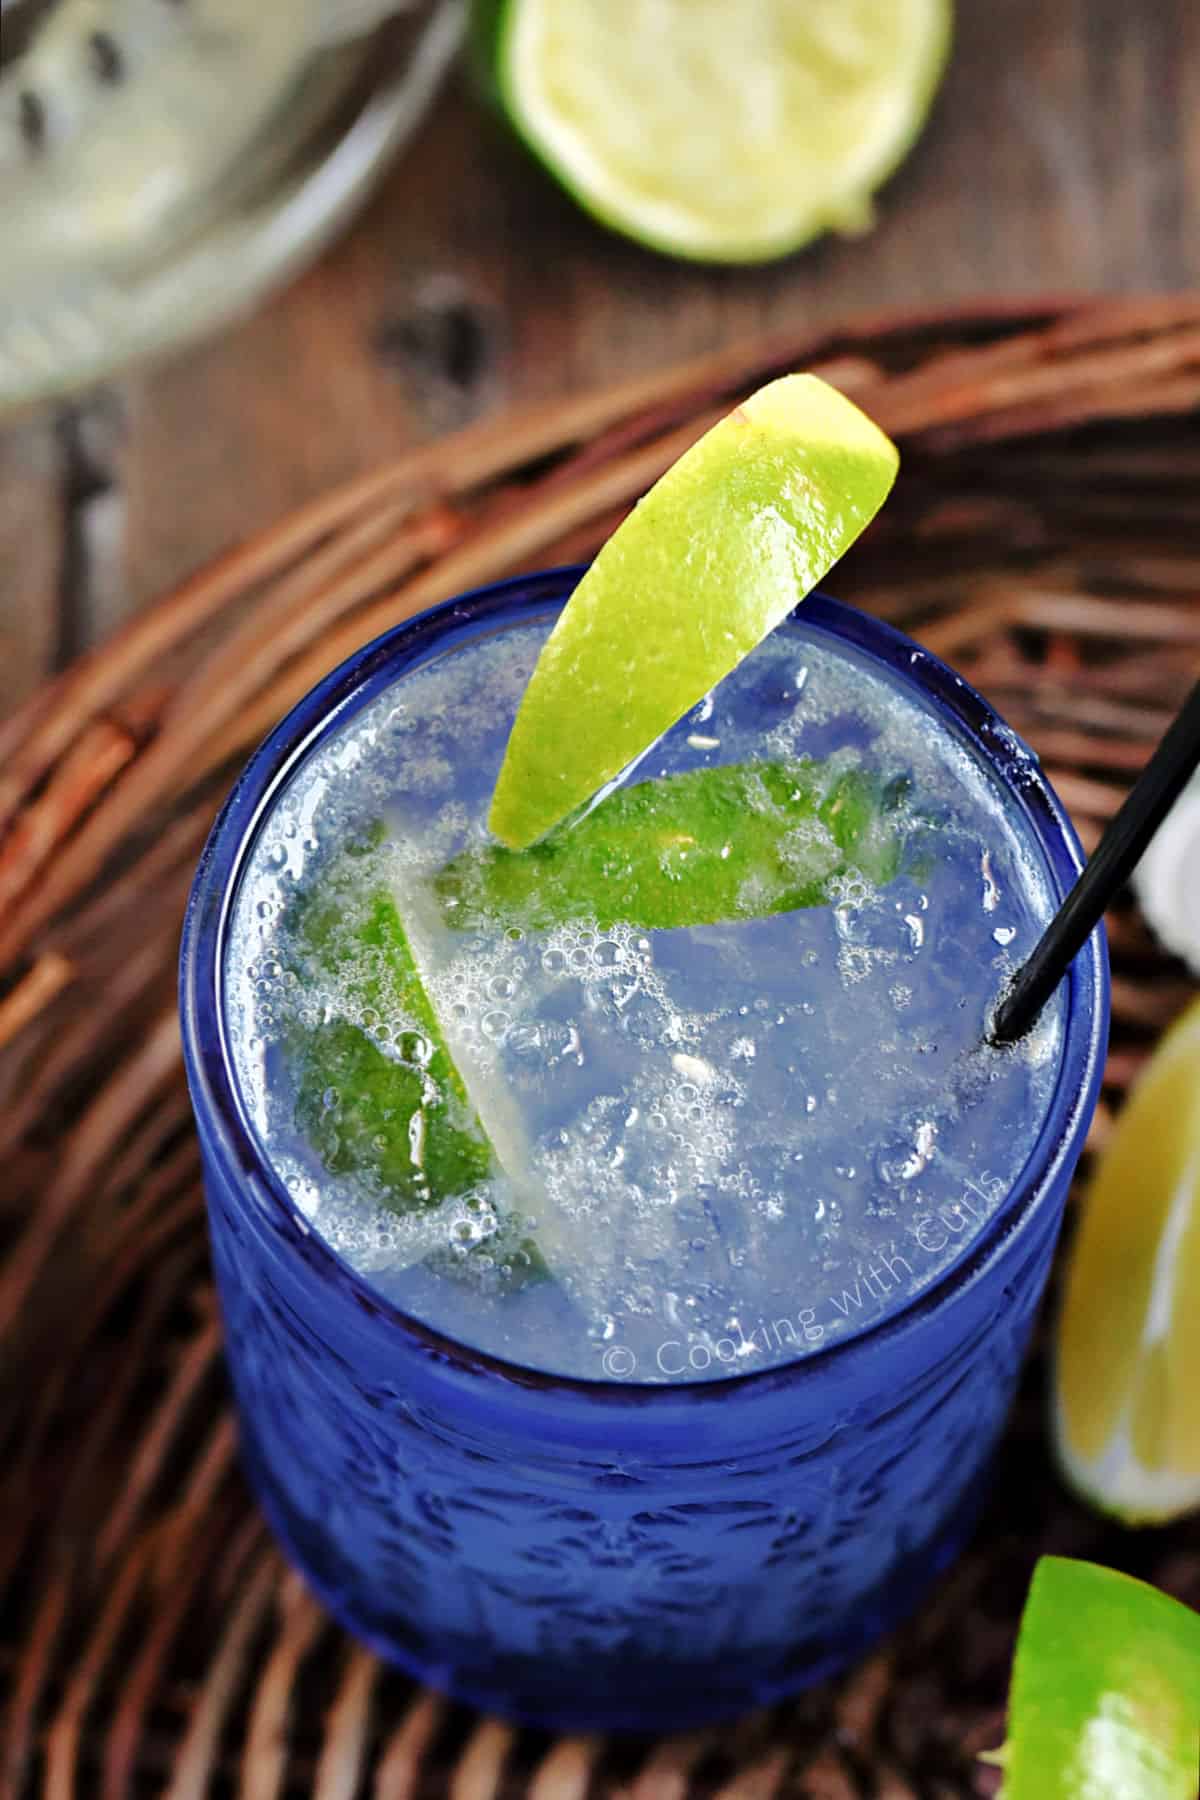 Looking down on a blue glass filled with a bubbly clear drink with lime wedge garnish.